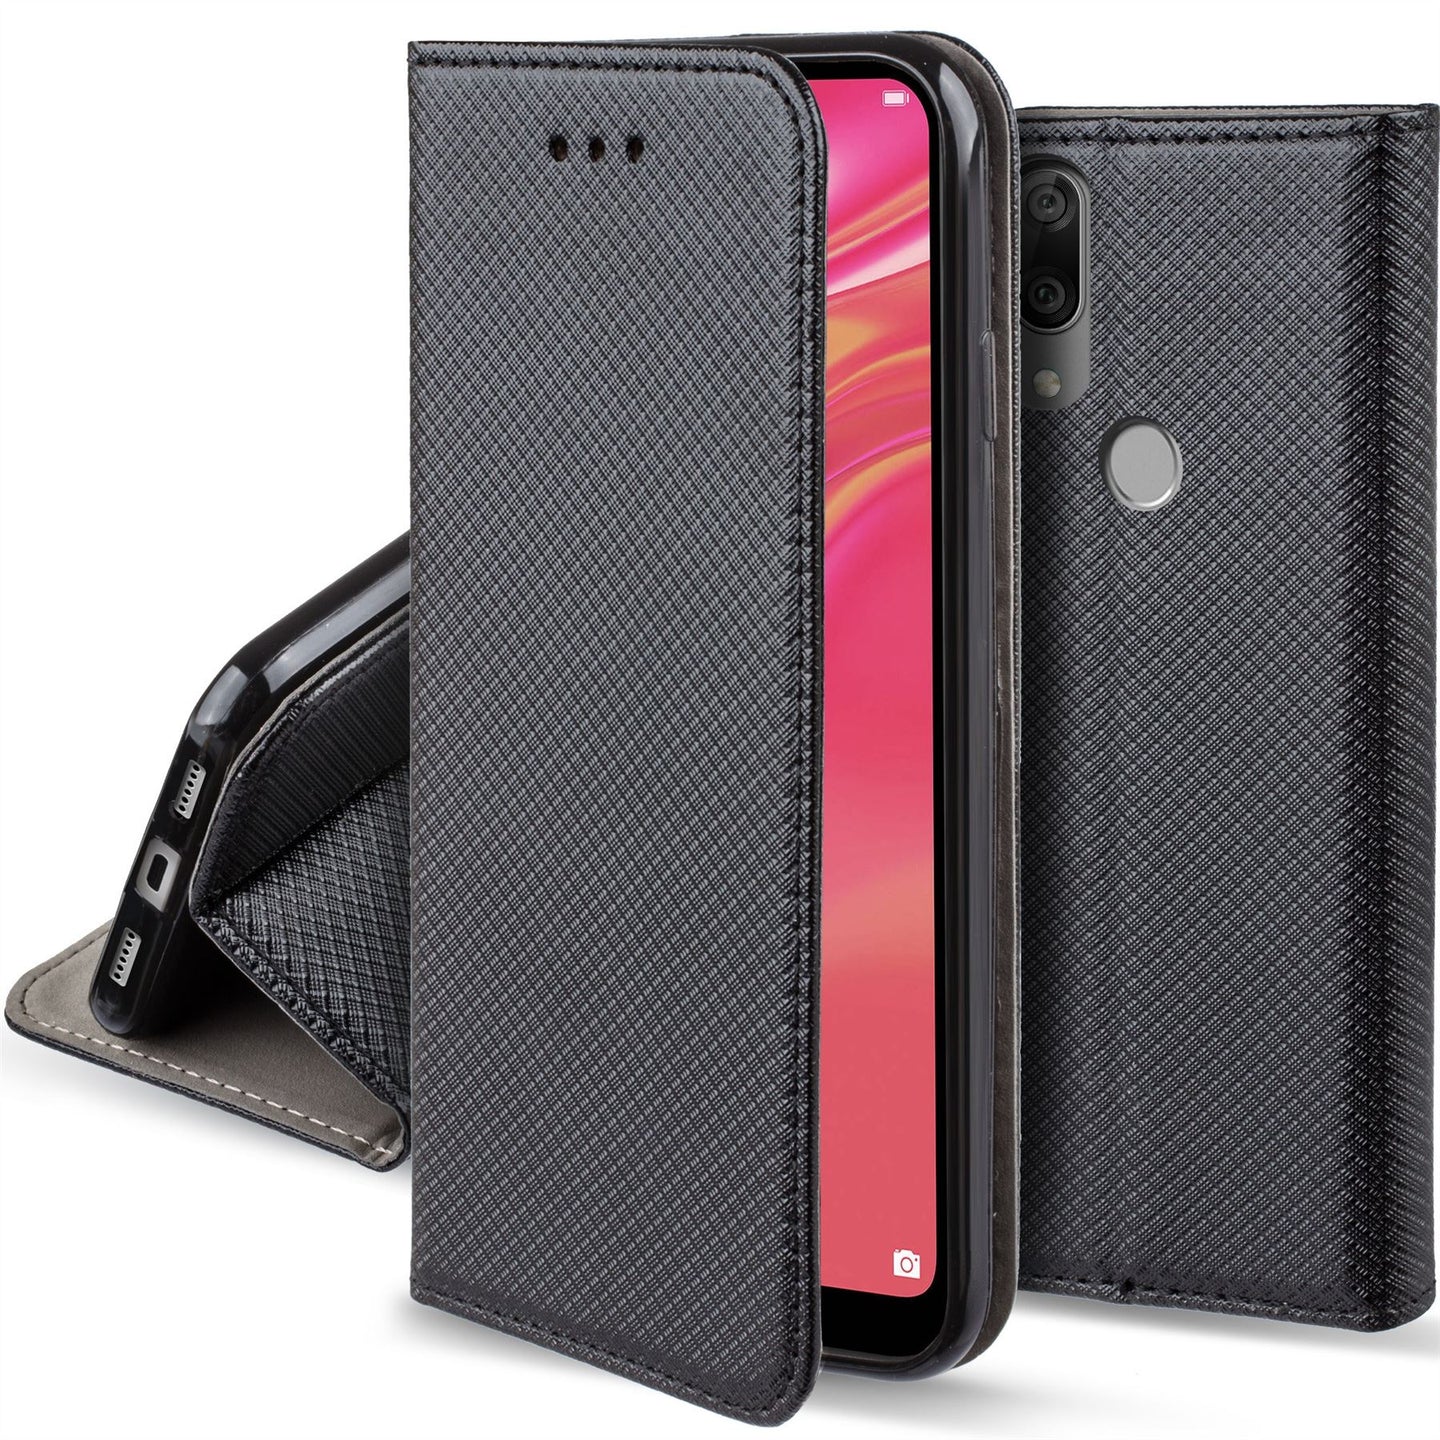 Moozy Case Flip Cover for Huawei Y7 2019, Huawei Y7 Prime 2019, Black - Smart Magnetic Flip Case with Card Holder and Stand